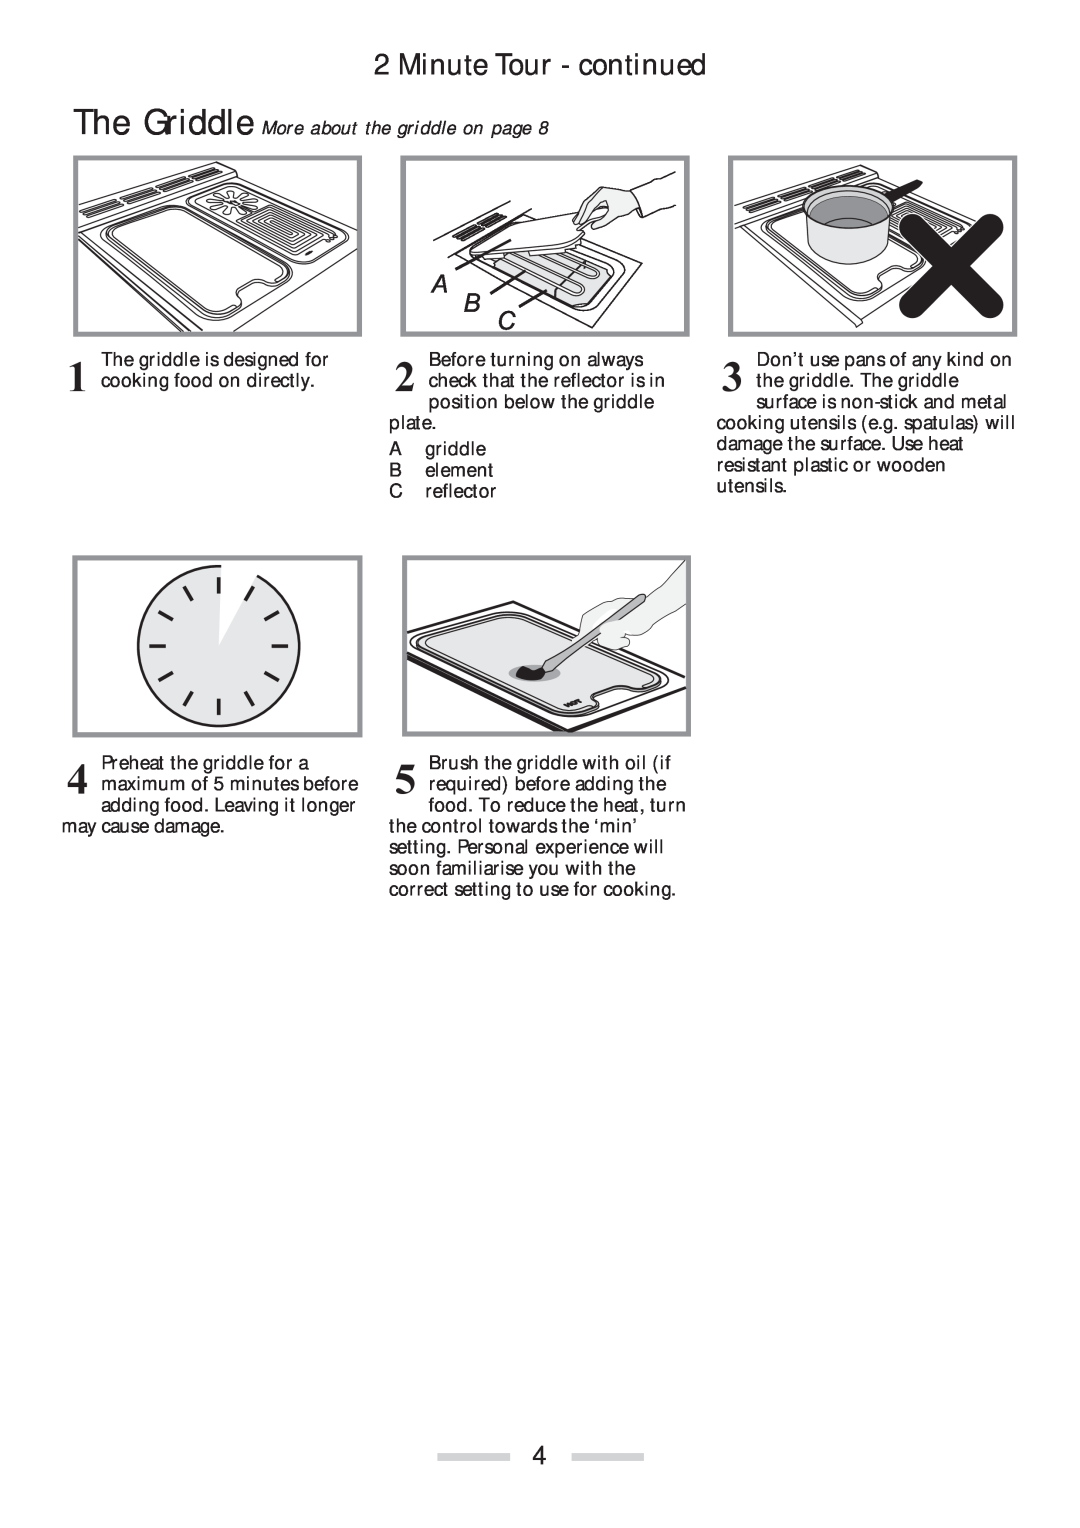 Rangemaster 110 installation instructions Minute Tour - continued, The Griddle More about the griddle on page 